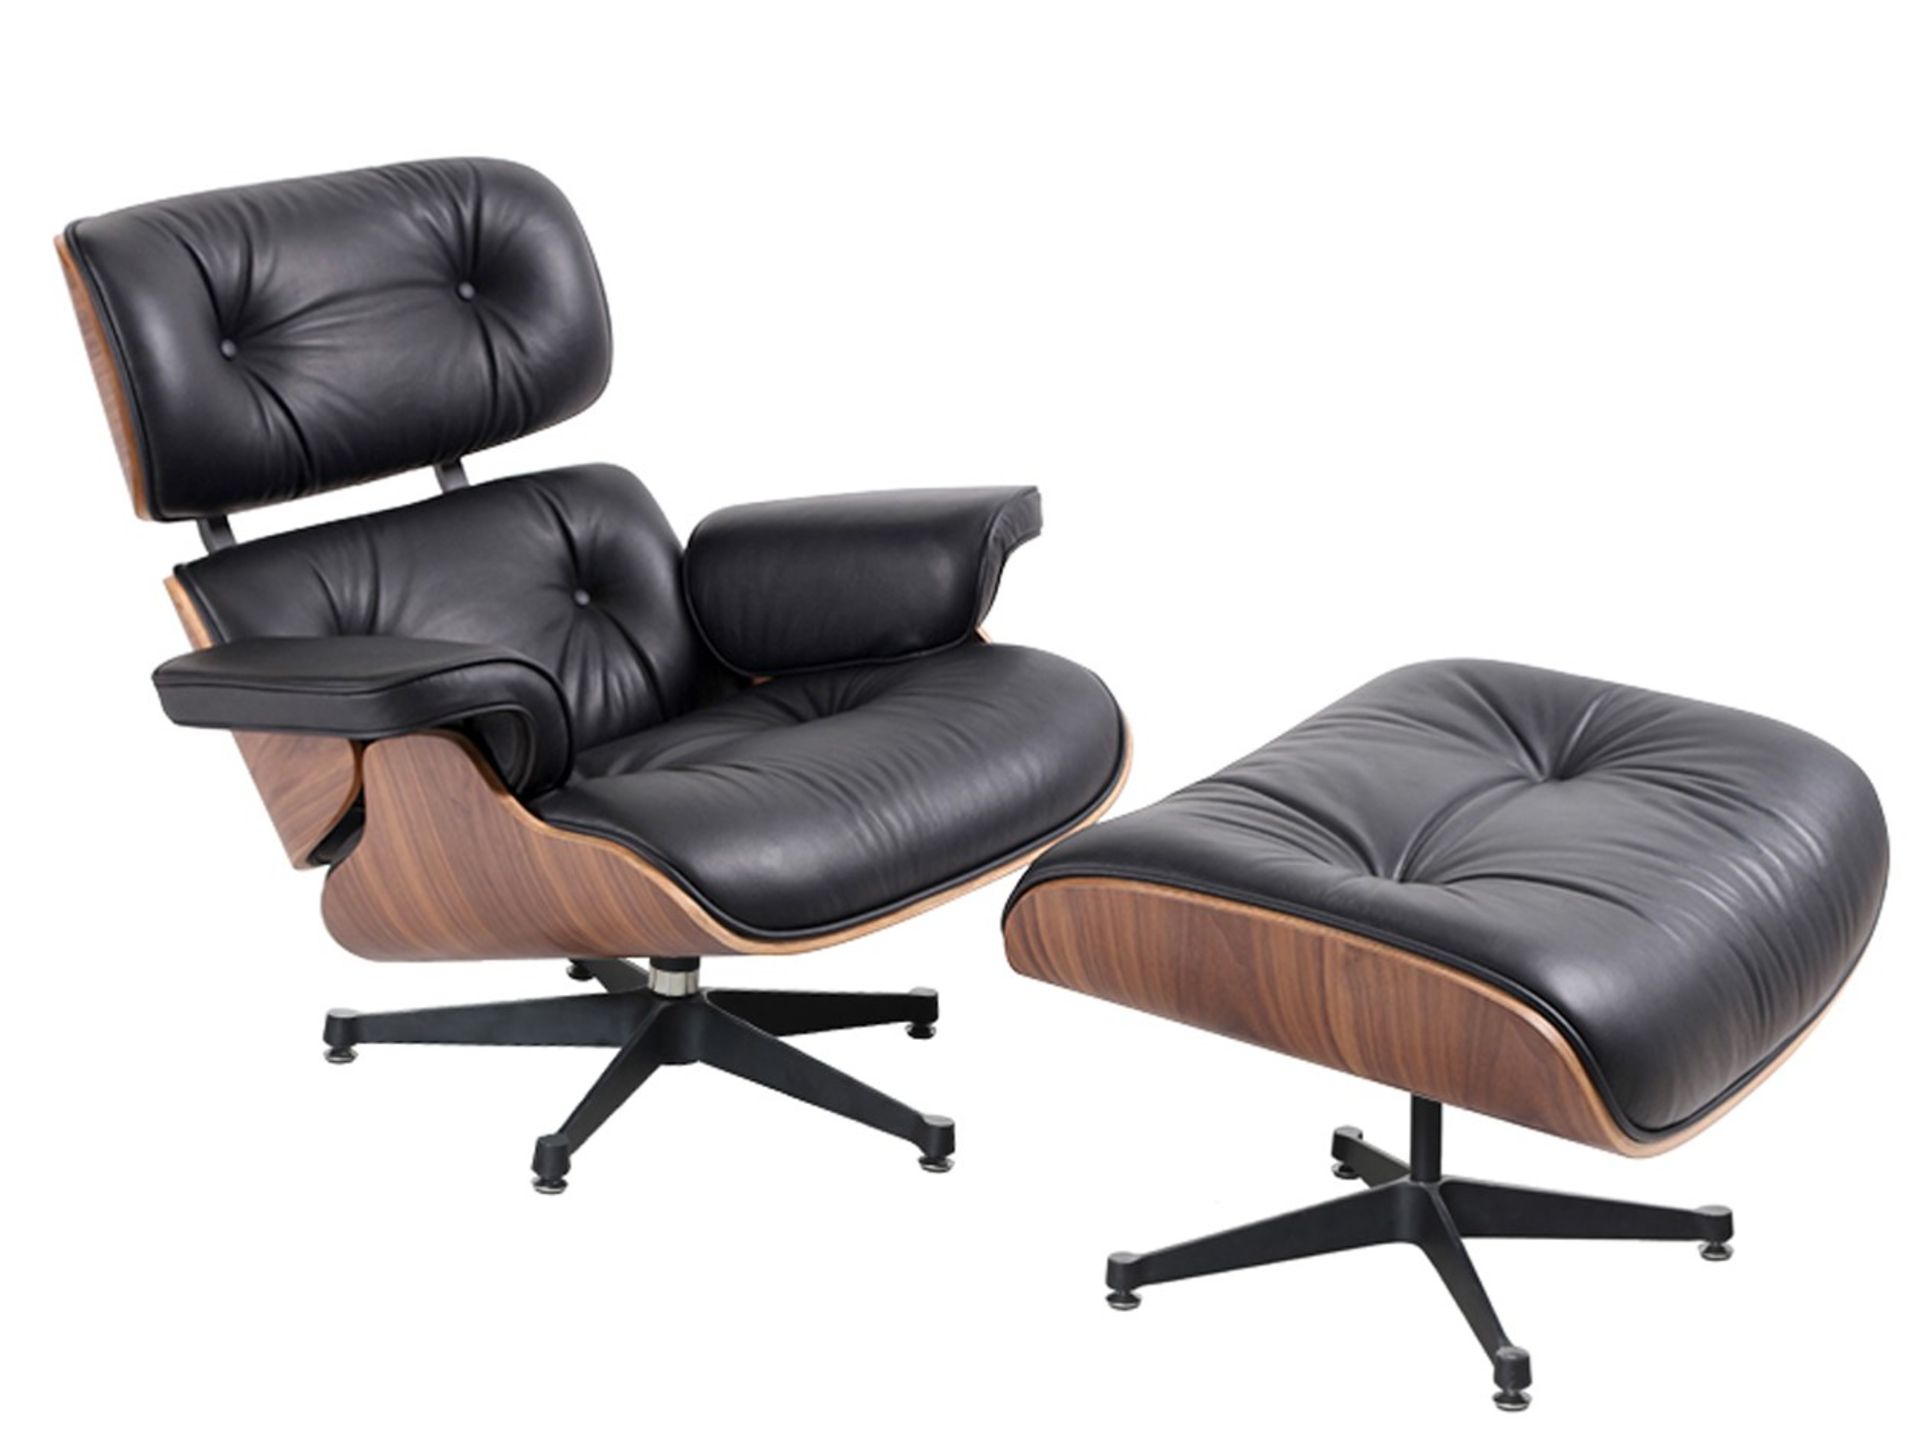 1 x Eames Inspired Lounge Chair With Ottoman - Black Leather and Walnut - Wood